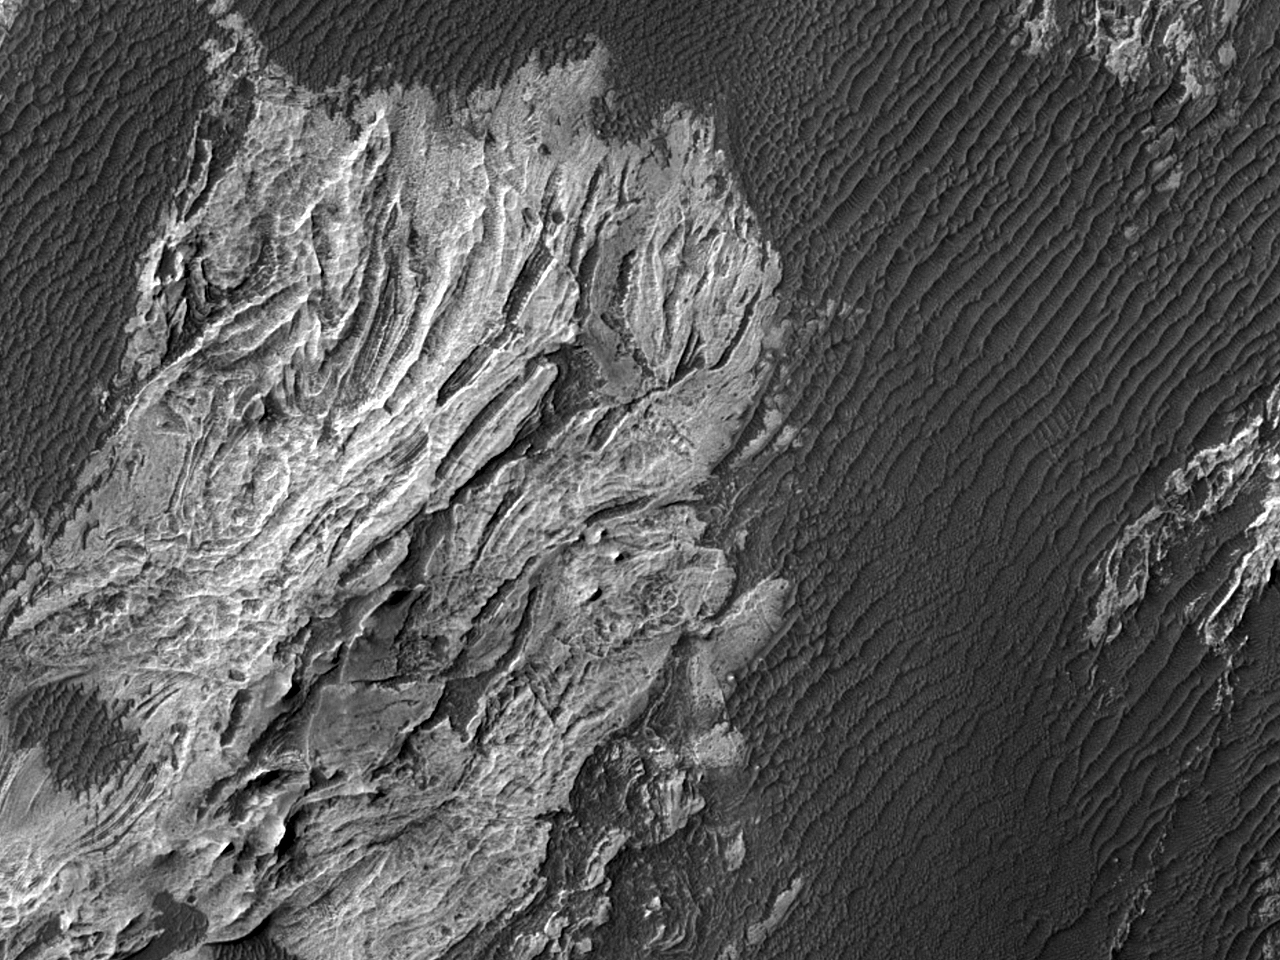 Layering and Faulting in Candor Chasma